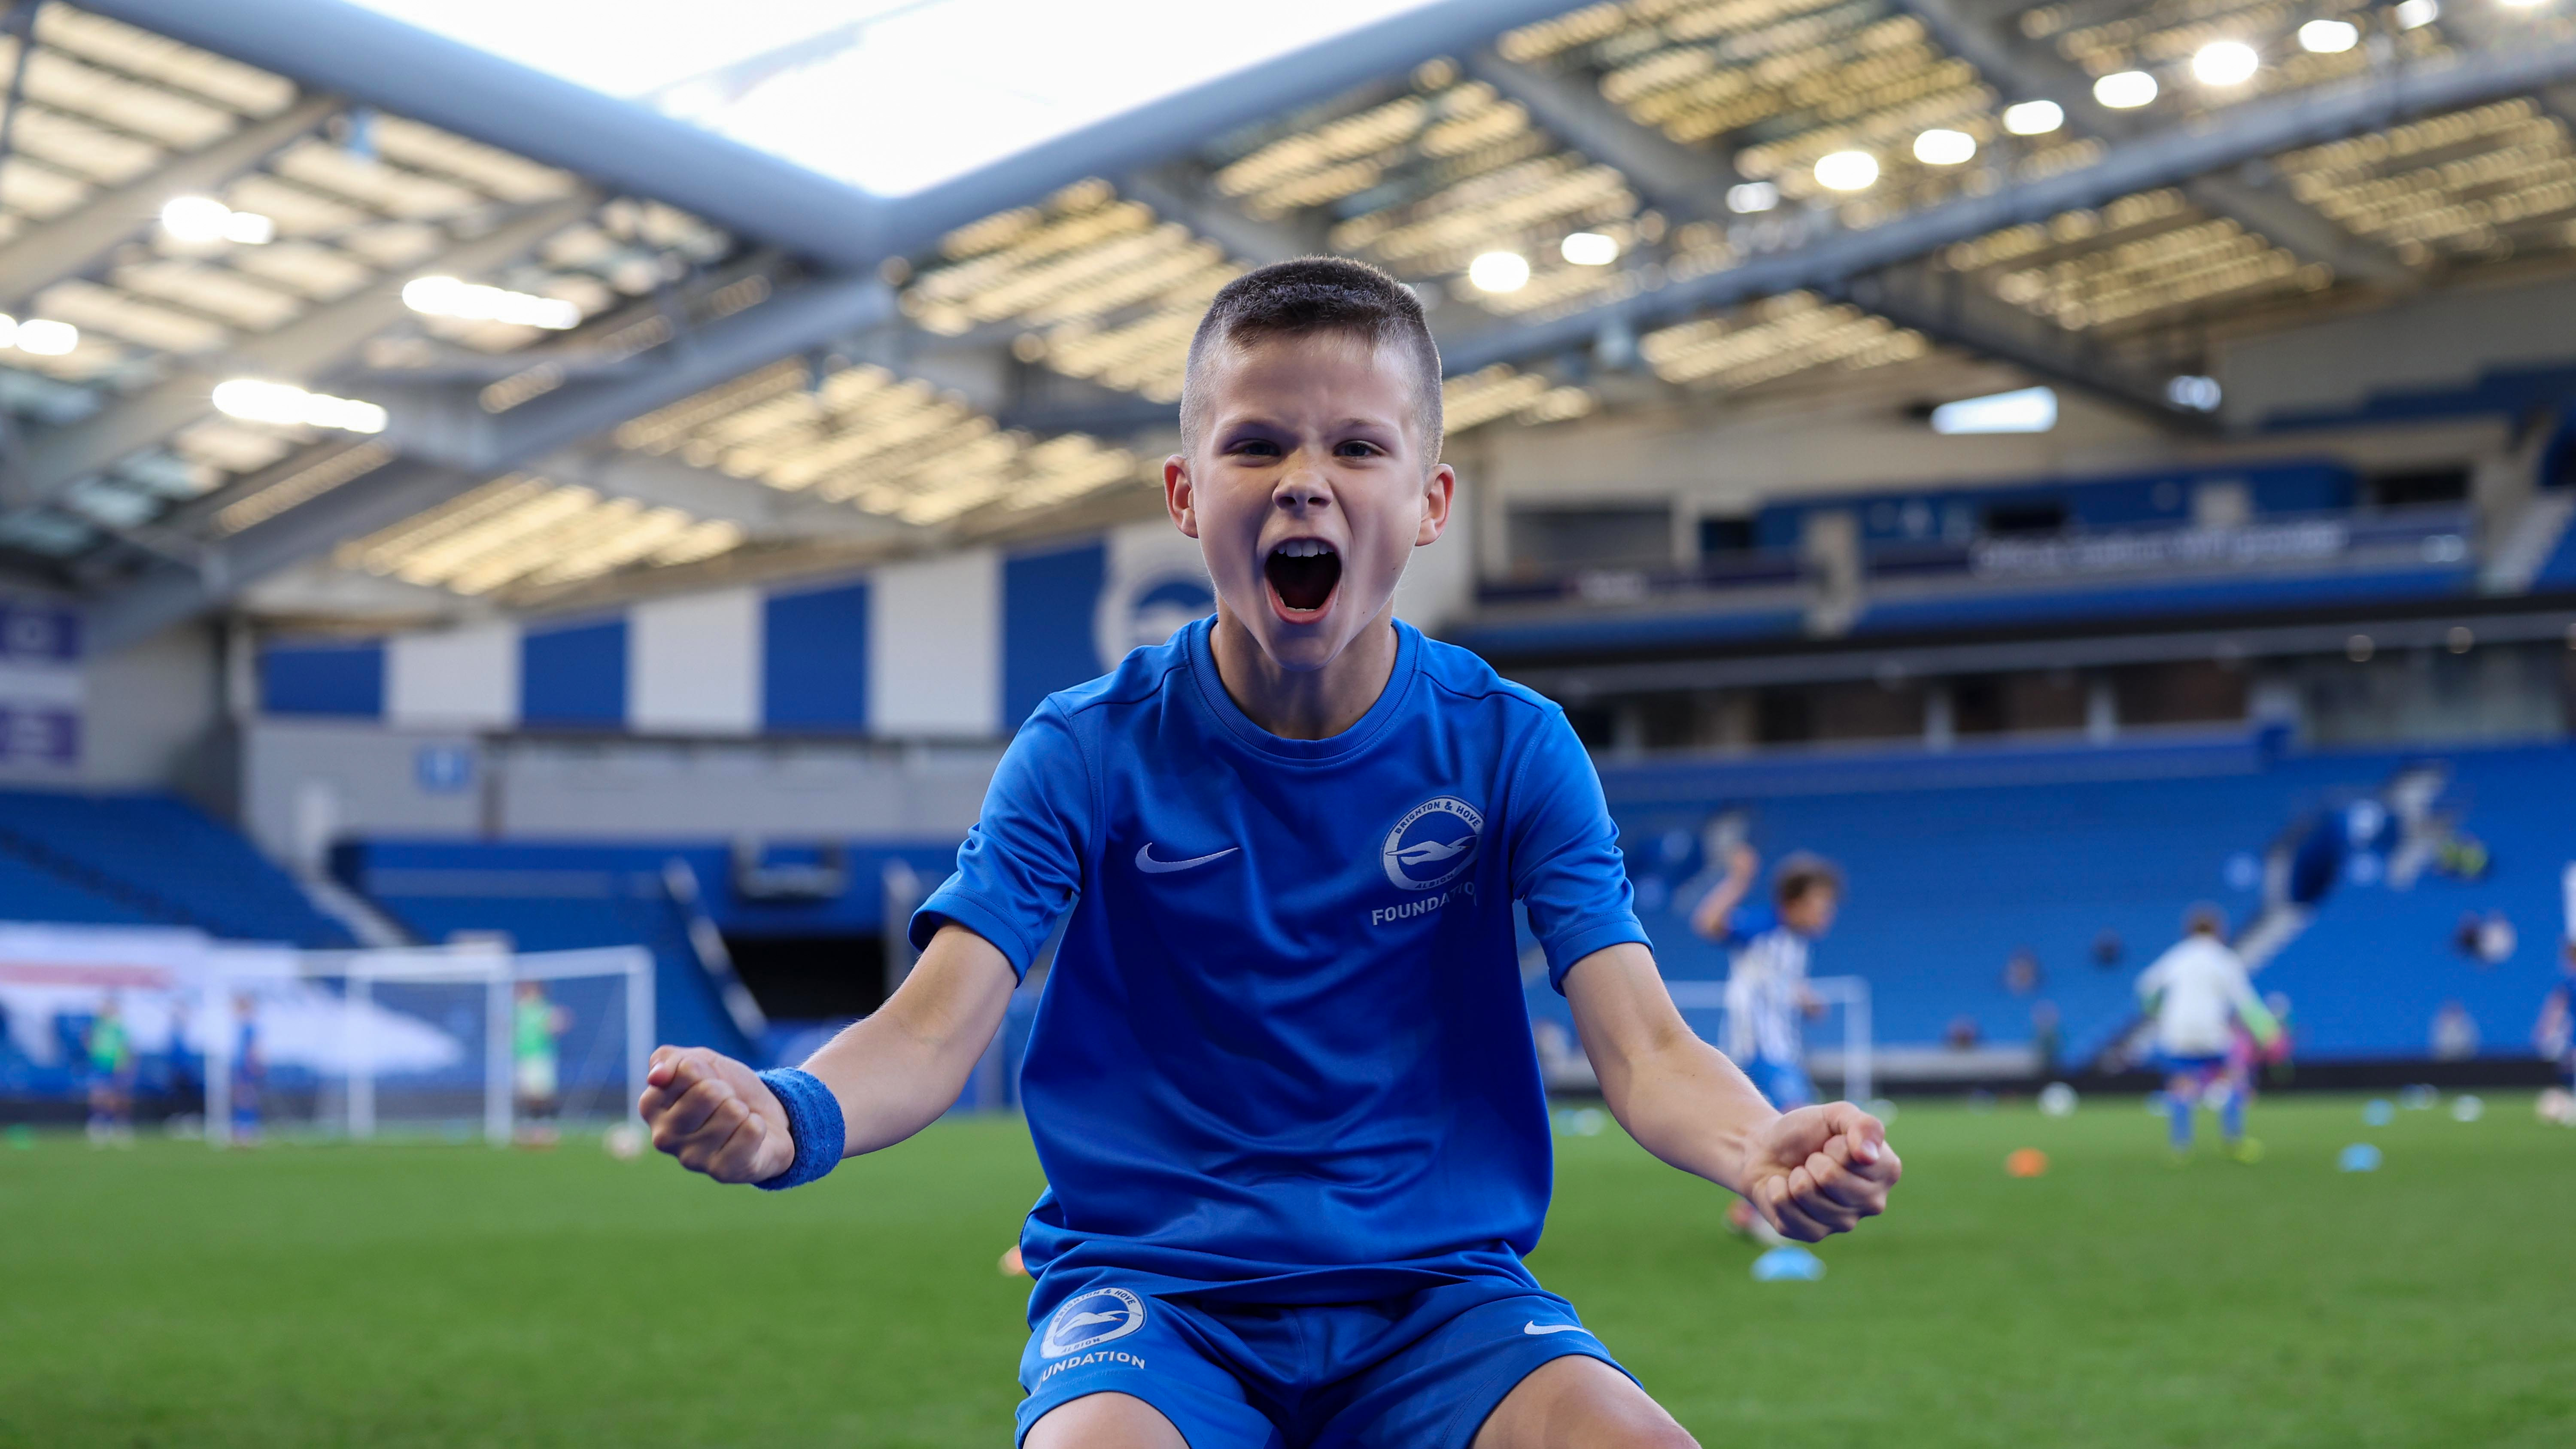 Hundreds of Sussex kids play on the Amex pitch